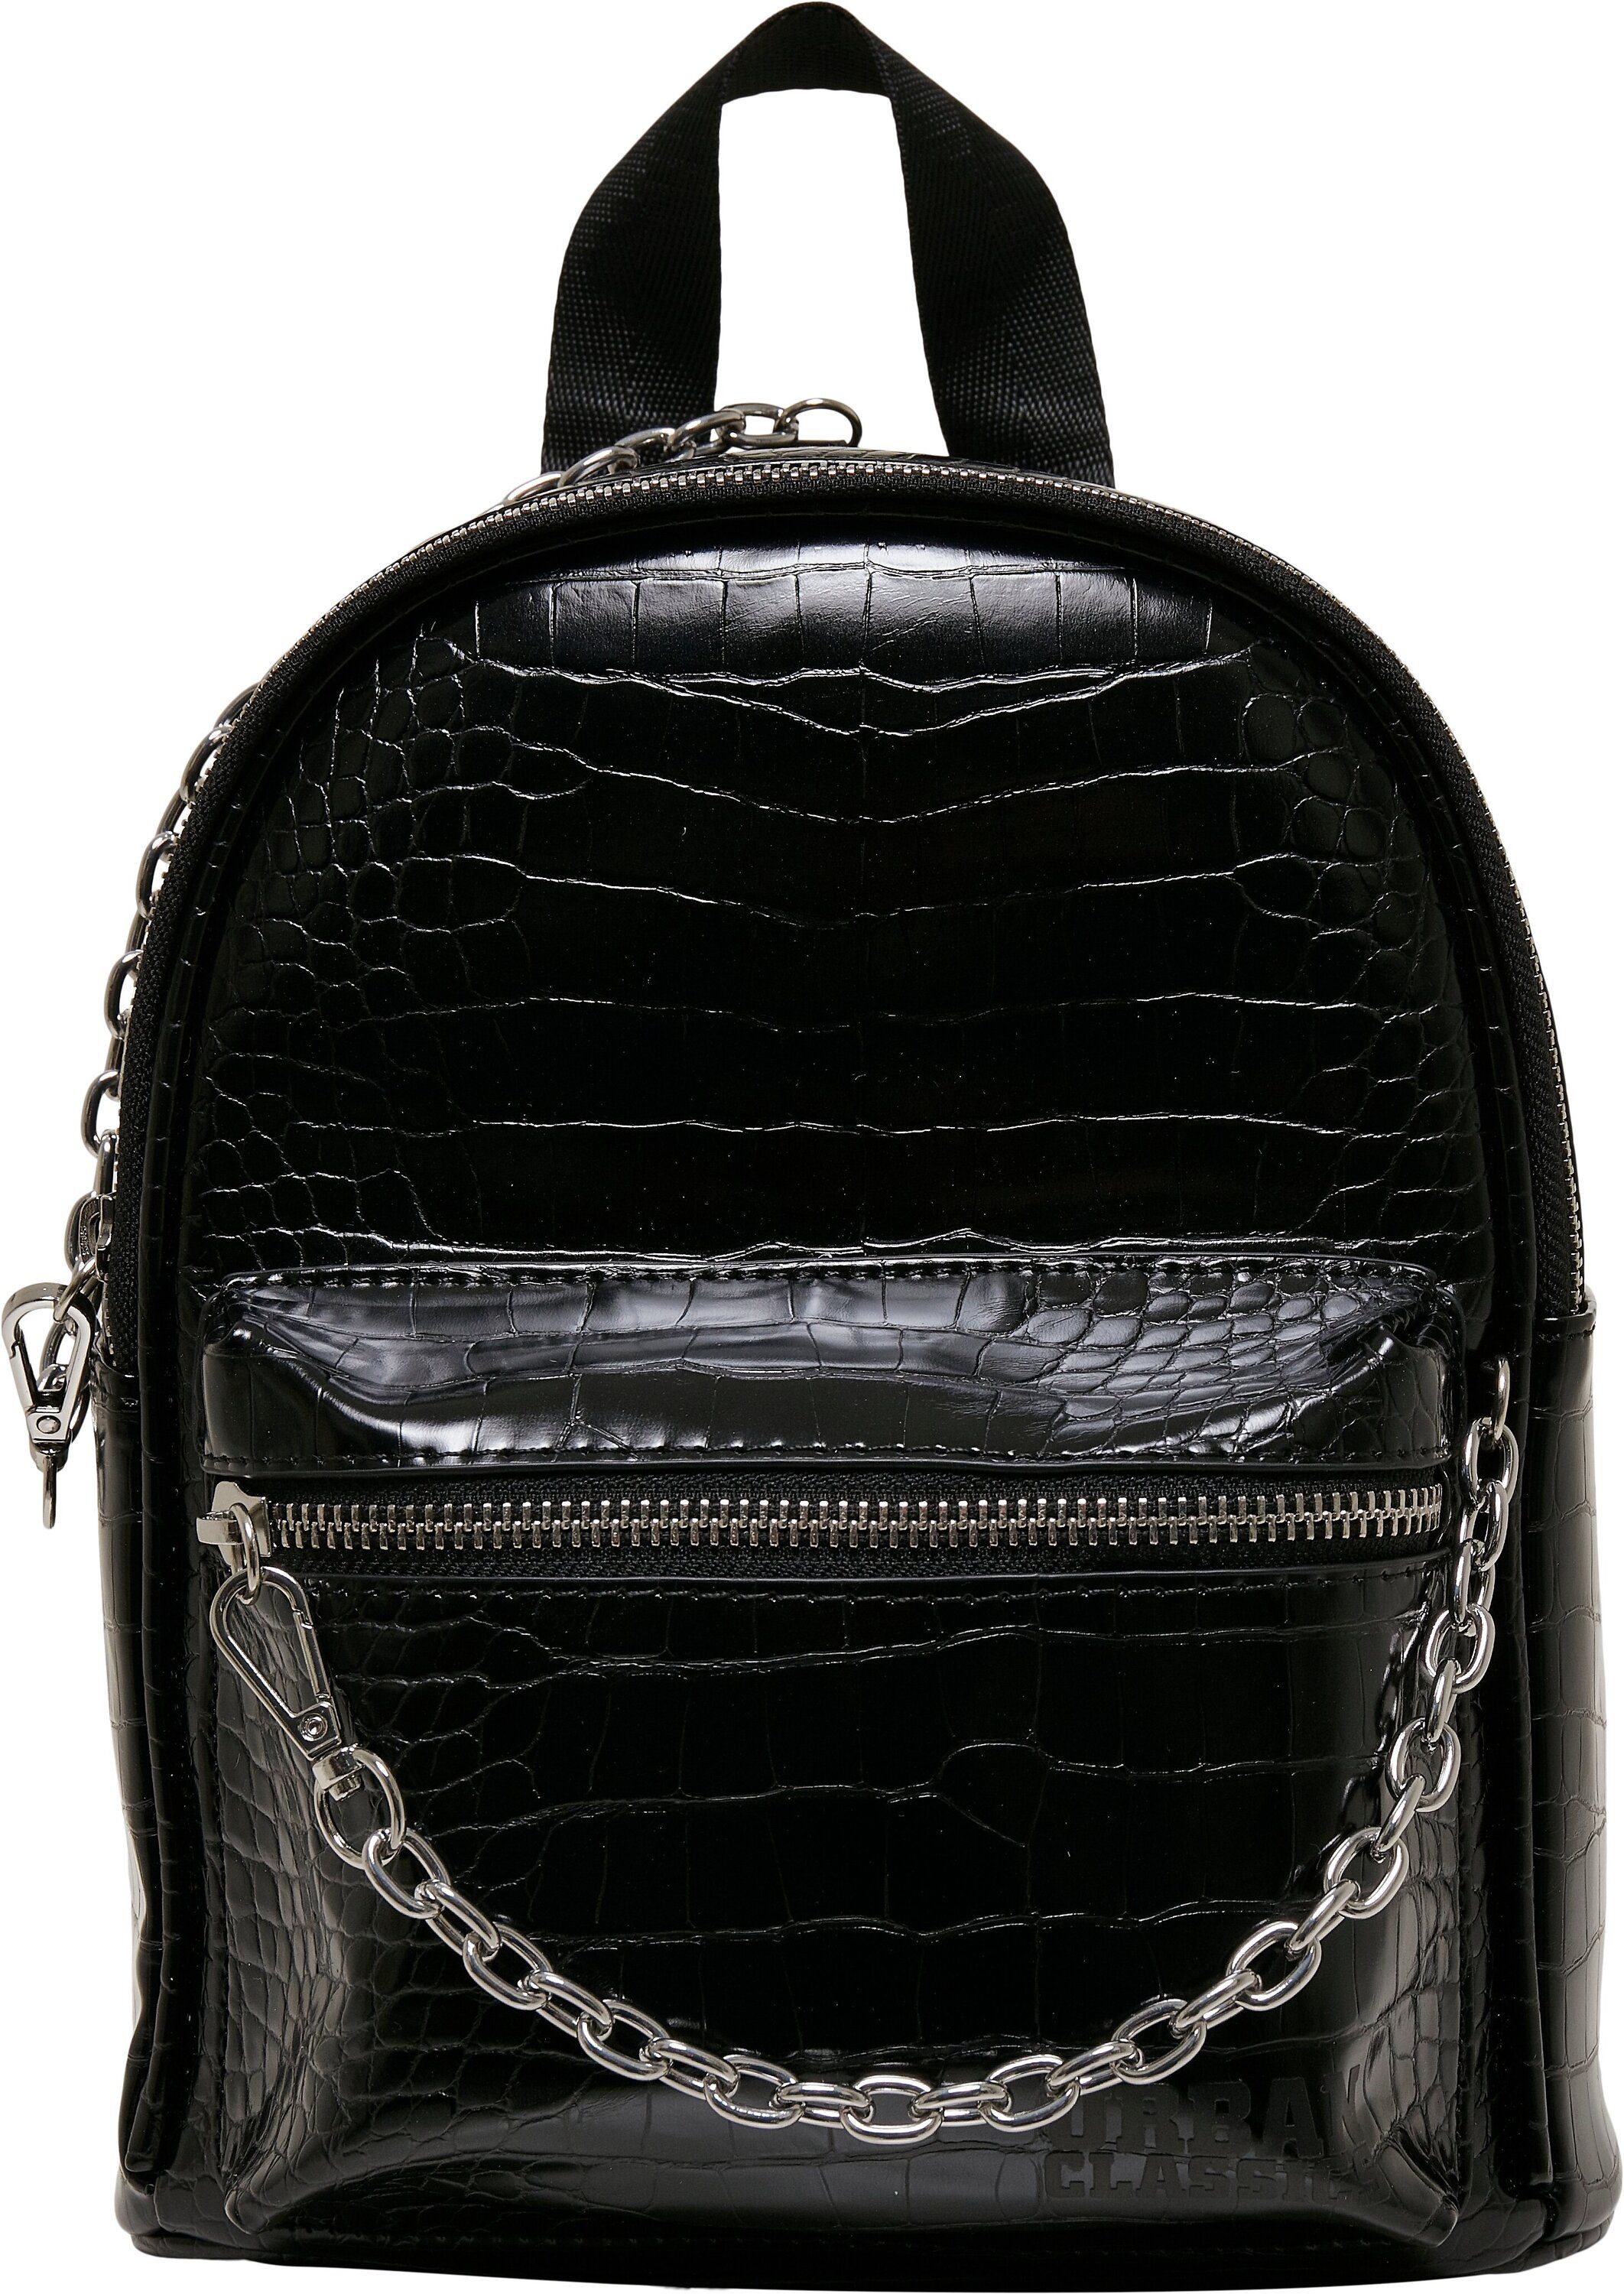 CLASSICS Unisex URBAN Leather Rucksack Backpack Synthetic Croco